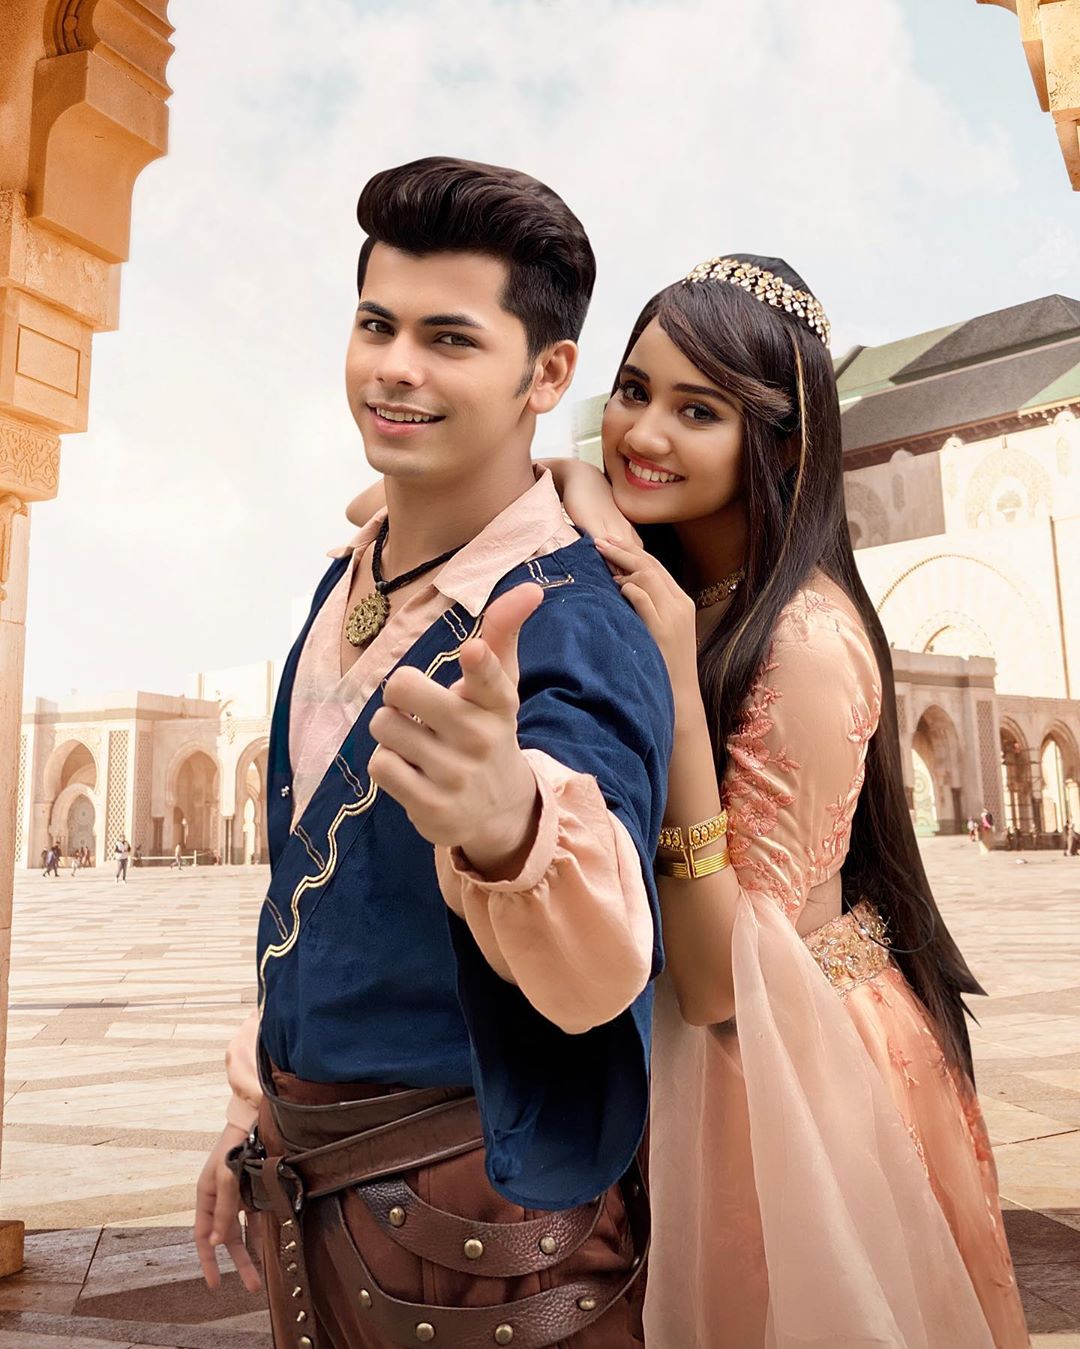 On Aladdin’s first day shoot, I was under confident and nervous but Siddharth Nigam motivated me: Ashi Singh 1